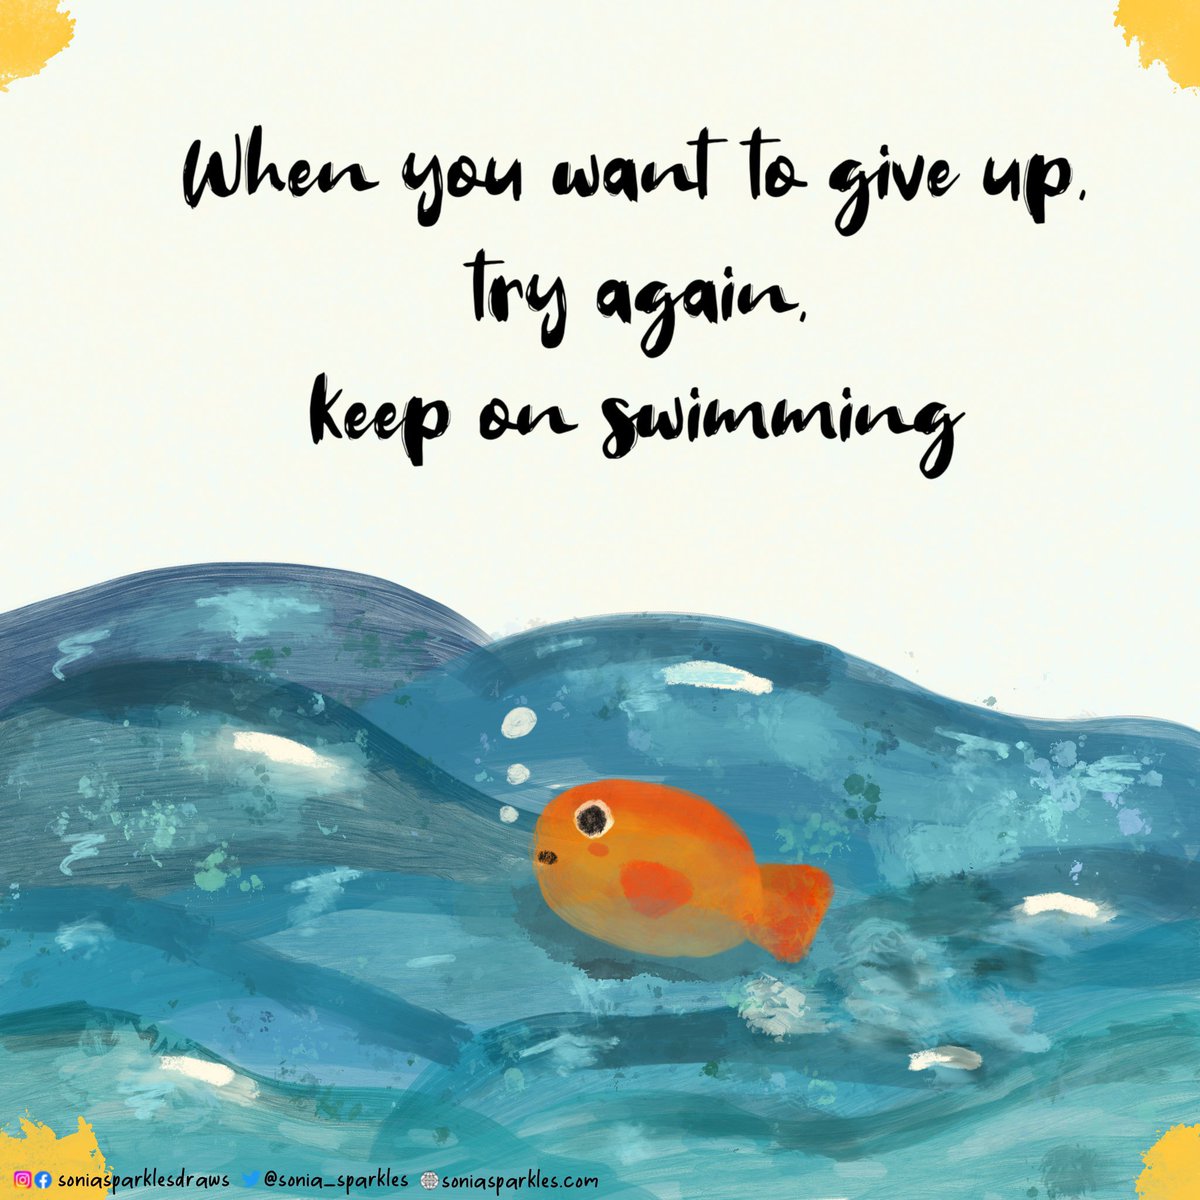 Many of us give up on our hopes, dreams and ambitions. We put ourselves down, let imposter syndrome creep in and self doubt takes over Here’s your call to keep going, one small step at a time, never give up & try again, you will get there 🐠